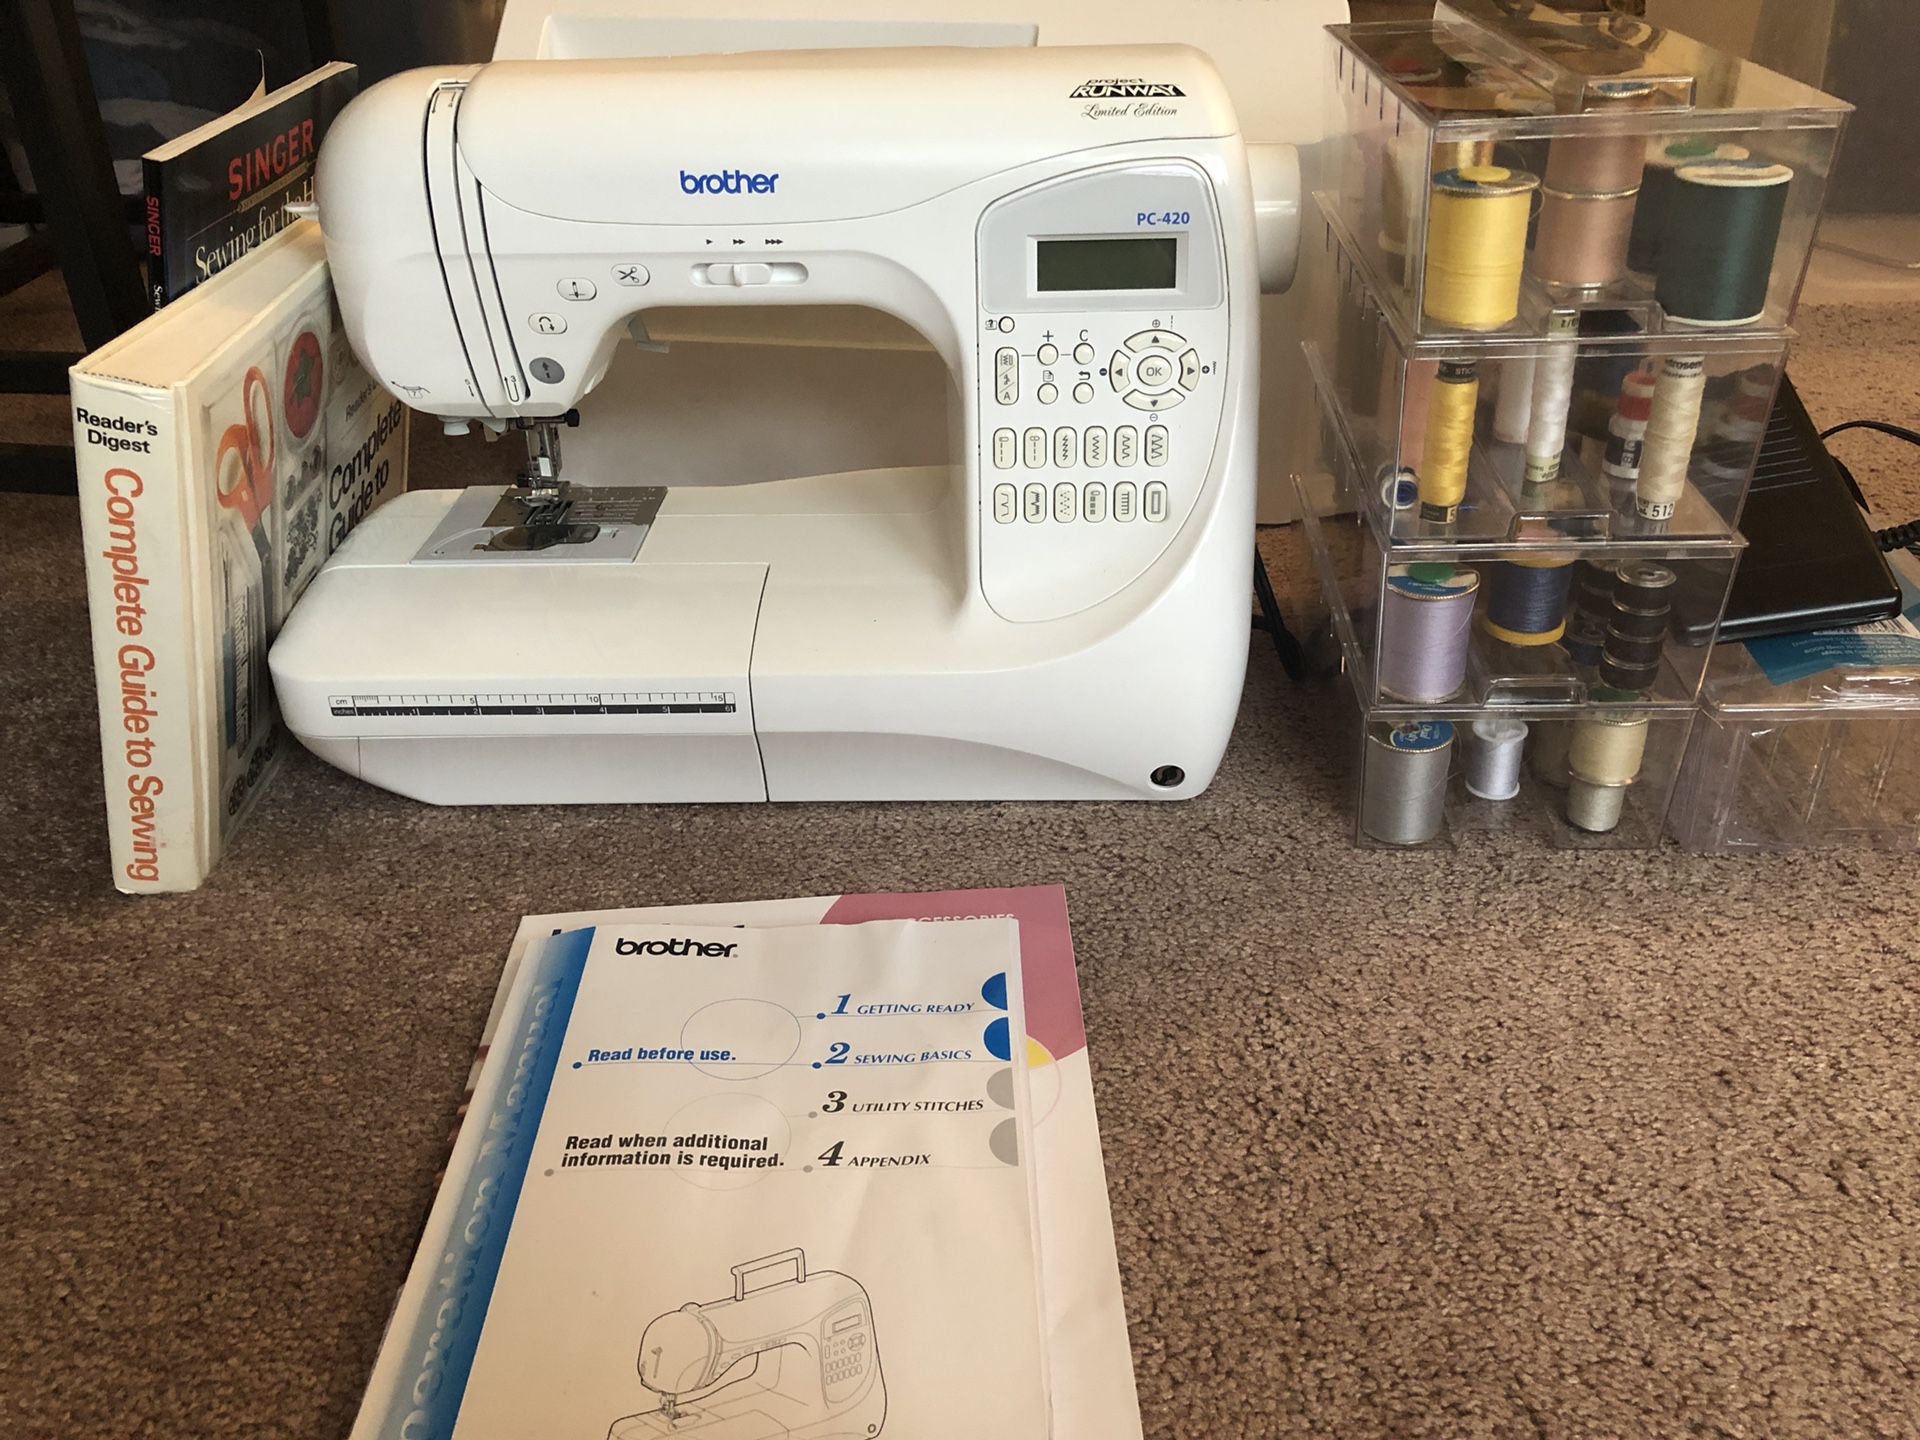 Sewing Machine with accessories (Brother PC420PRW)